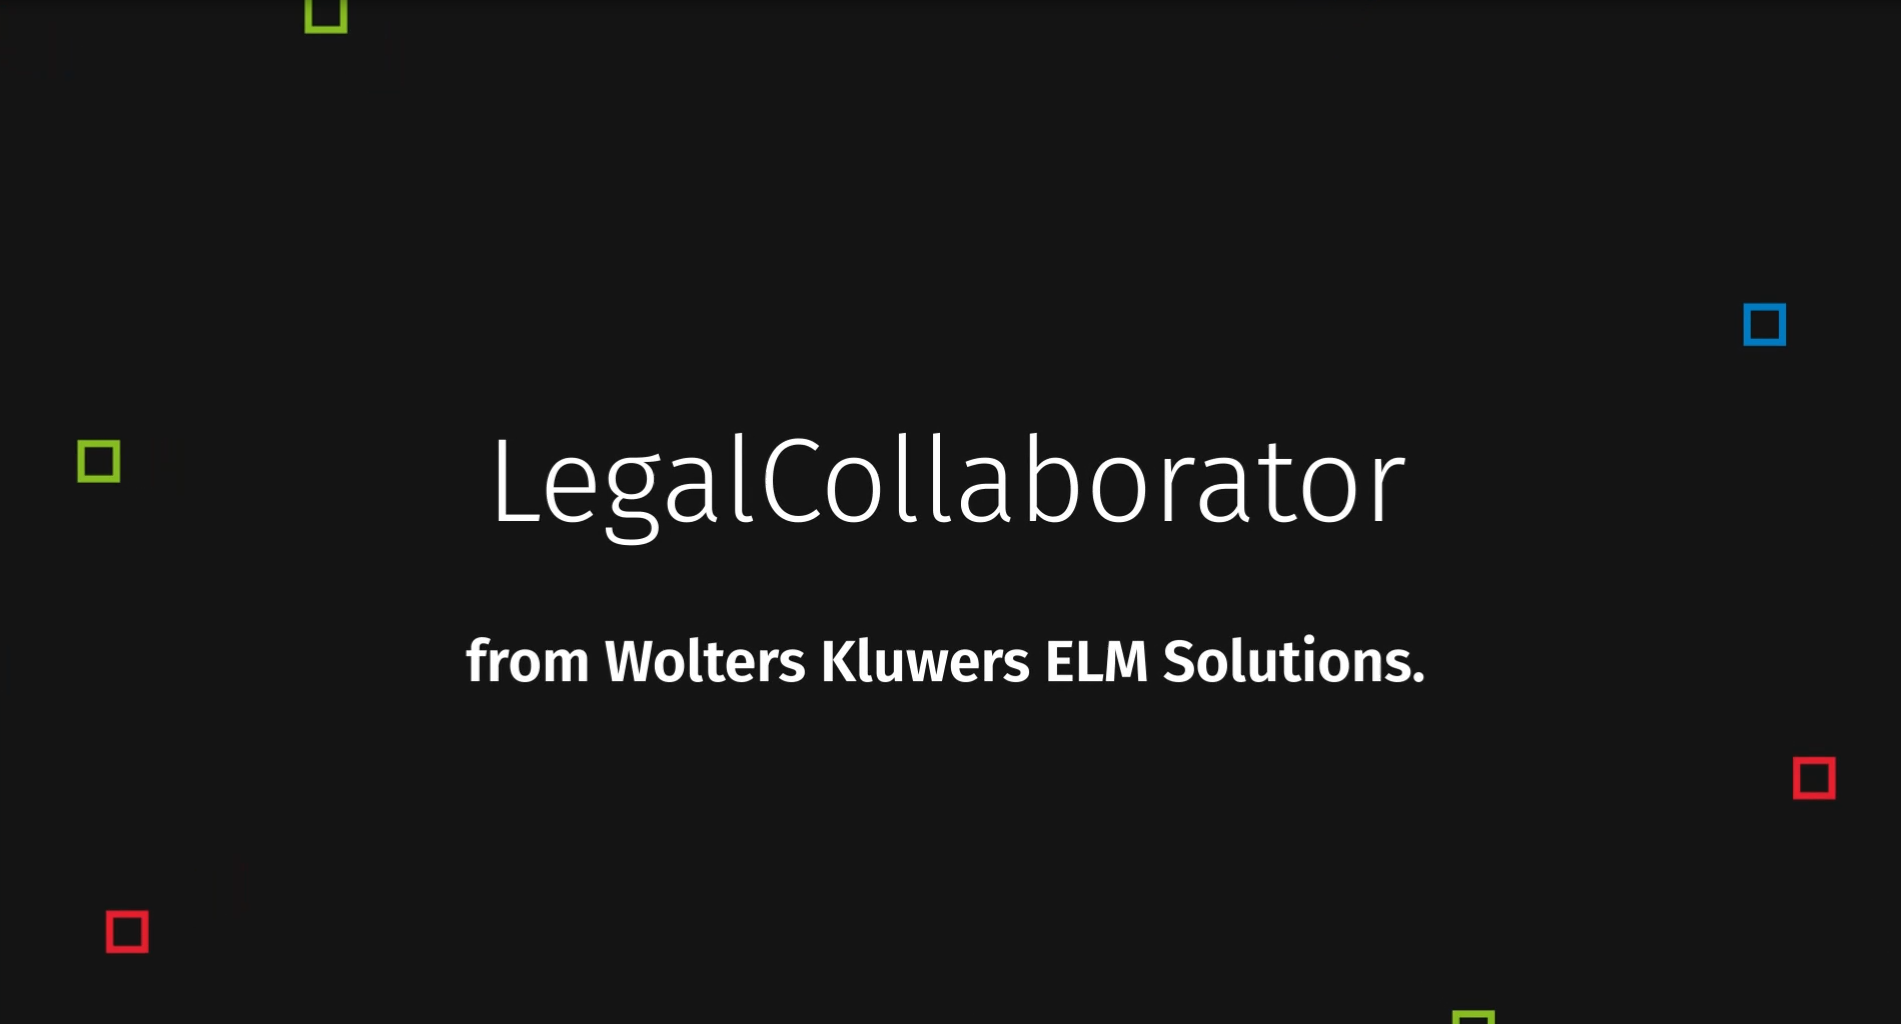 LegalCollaborator, early firm engagement and competitive bidding